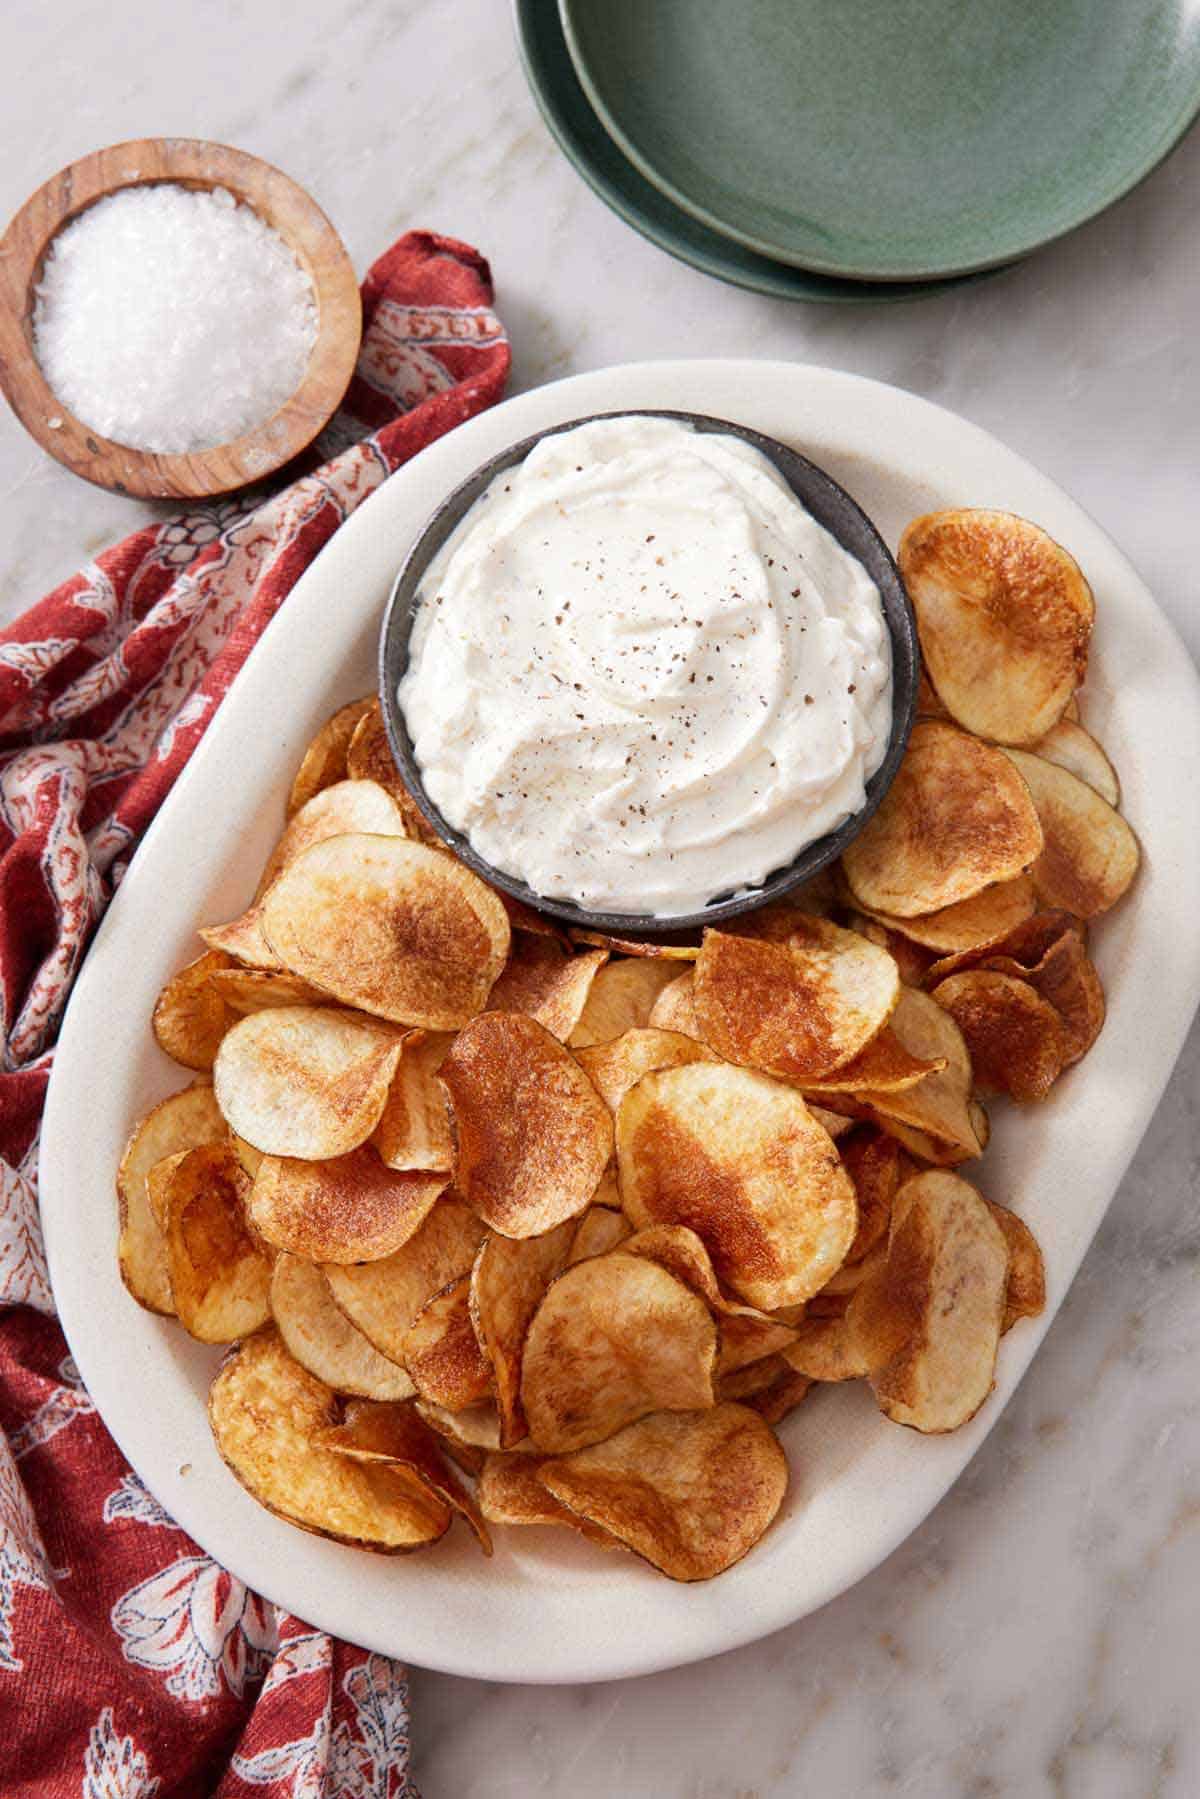 Overhead view of a platter of homemade potato chips with a bowl of dip. A small bowl of salt and some plates on the side.